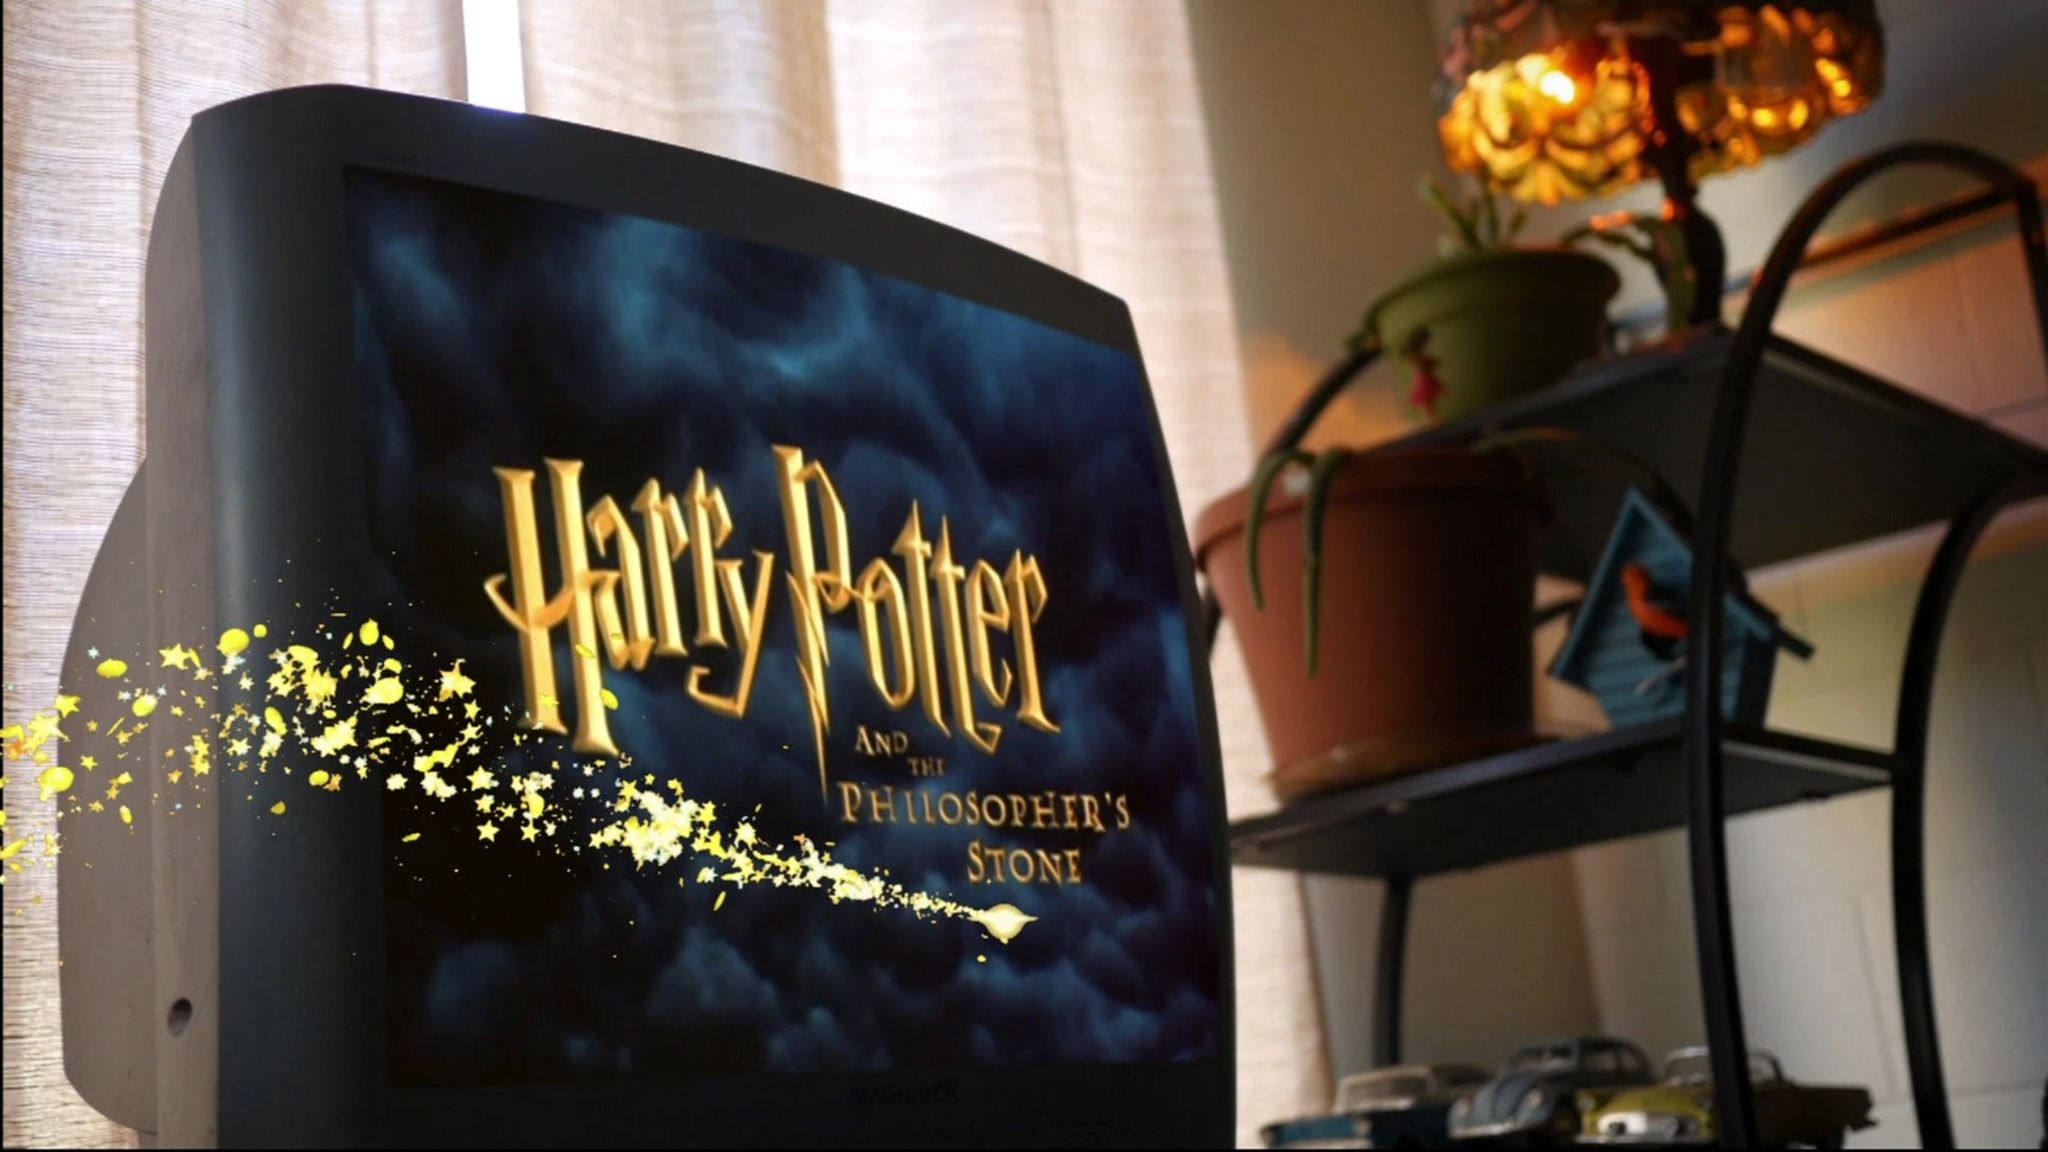 Harry Potter titles on a tv screen